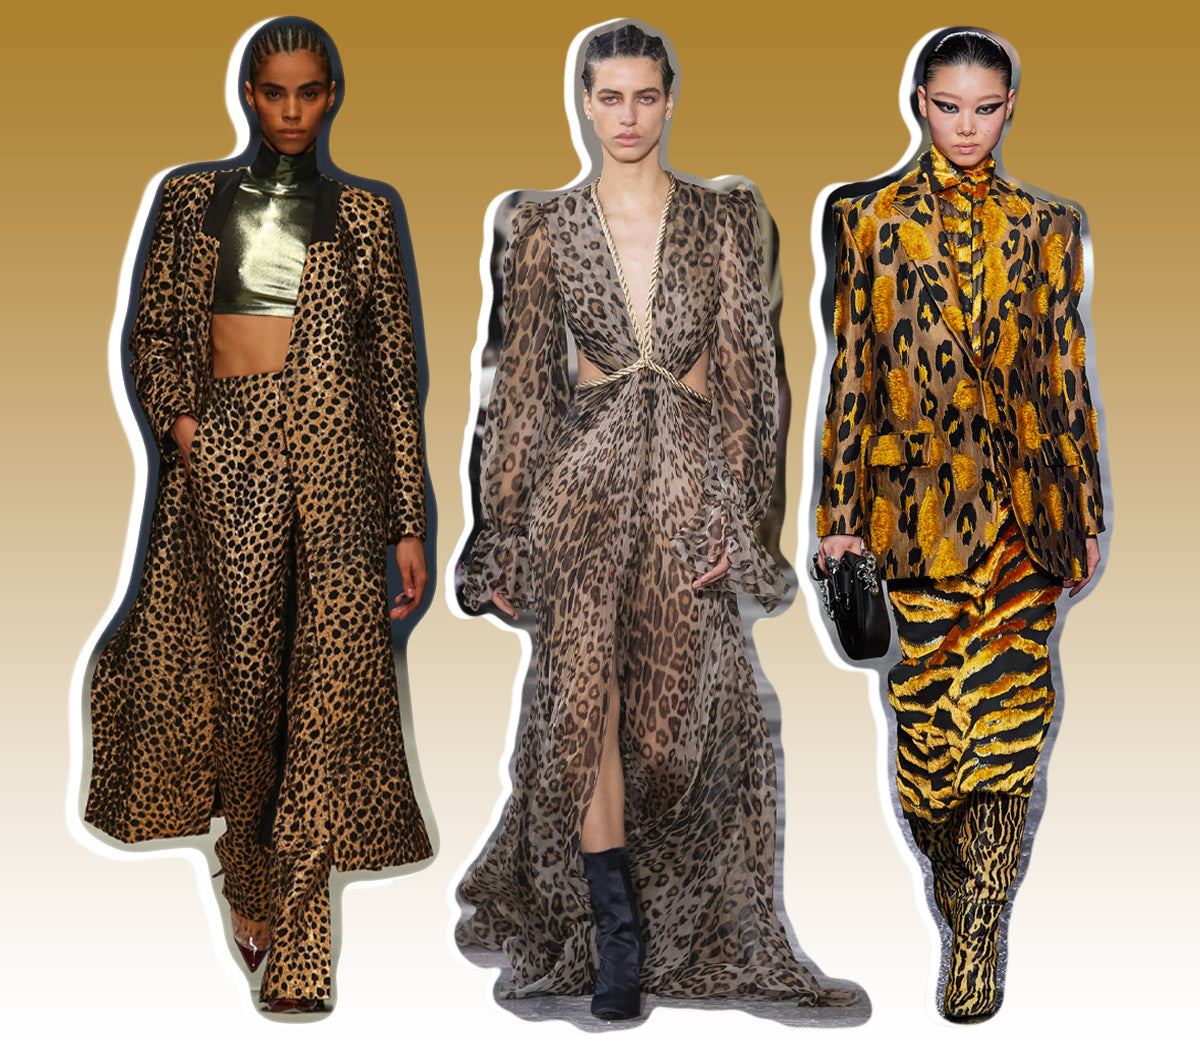 Shop Trending Animal Print Styles at French Cuff Boutique | Fall/Winter 2022 Fashion Trends